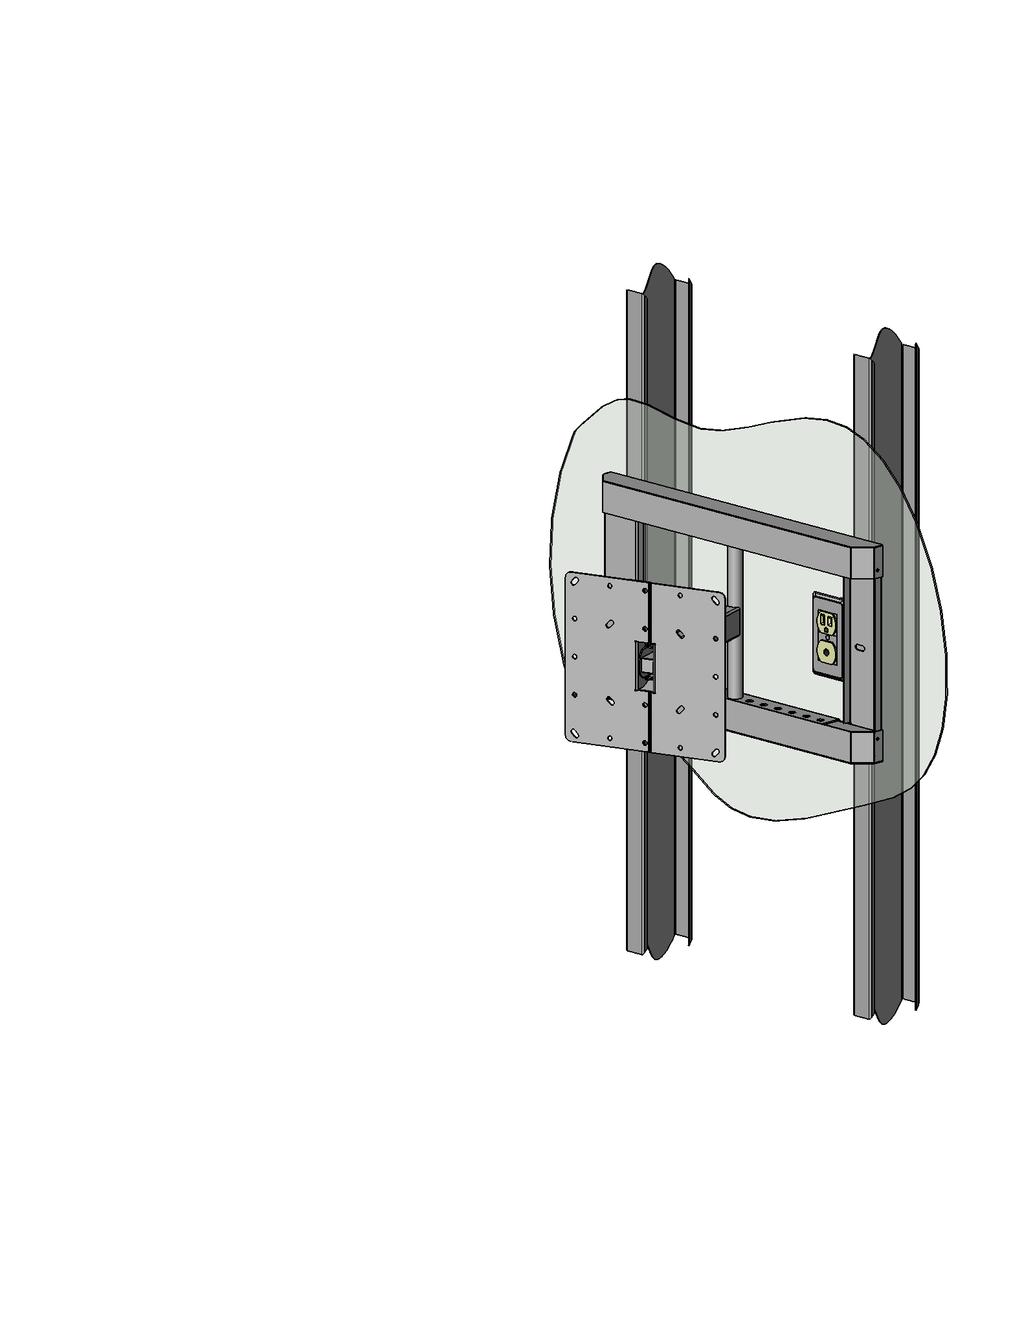 Page 1 of 6 LC200DS1 Double Stud Articulating Wall Mount for Flat Panel Screens up to 32" with up to 200mm x 200mm VESA Mounting Patterns A multi-position dual articulating arm for flat screens up to